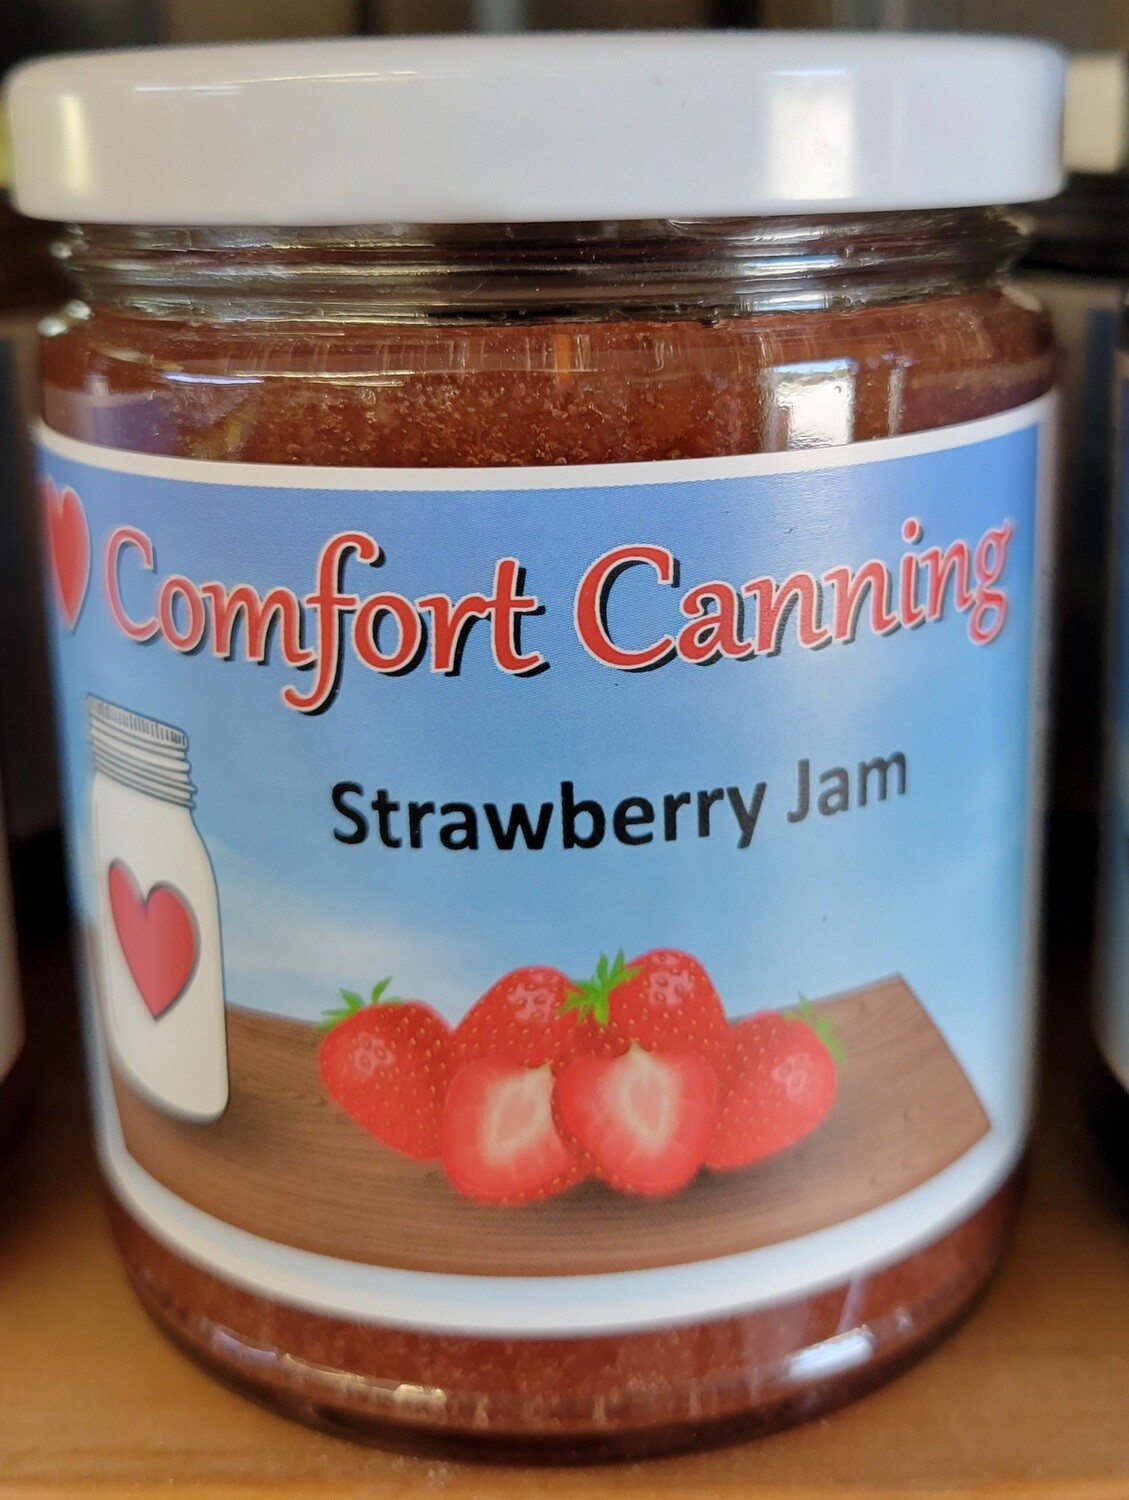 Comfort Canning - Jams & Jelly